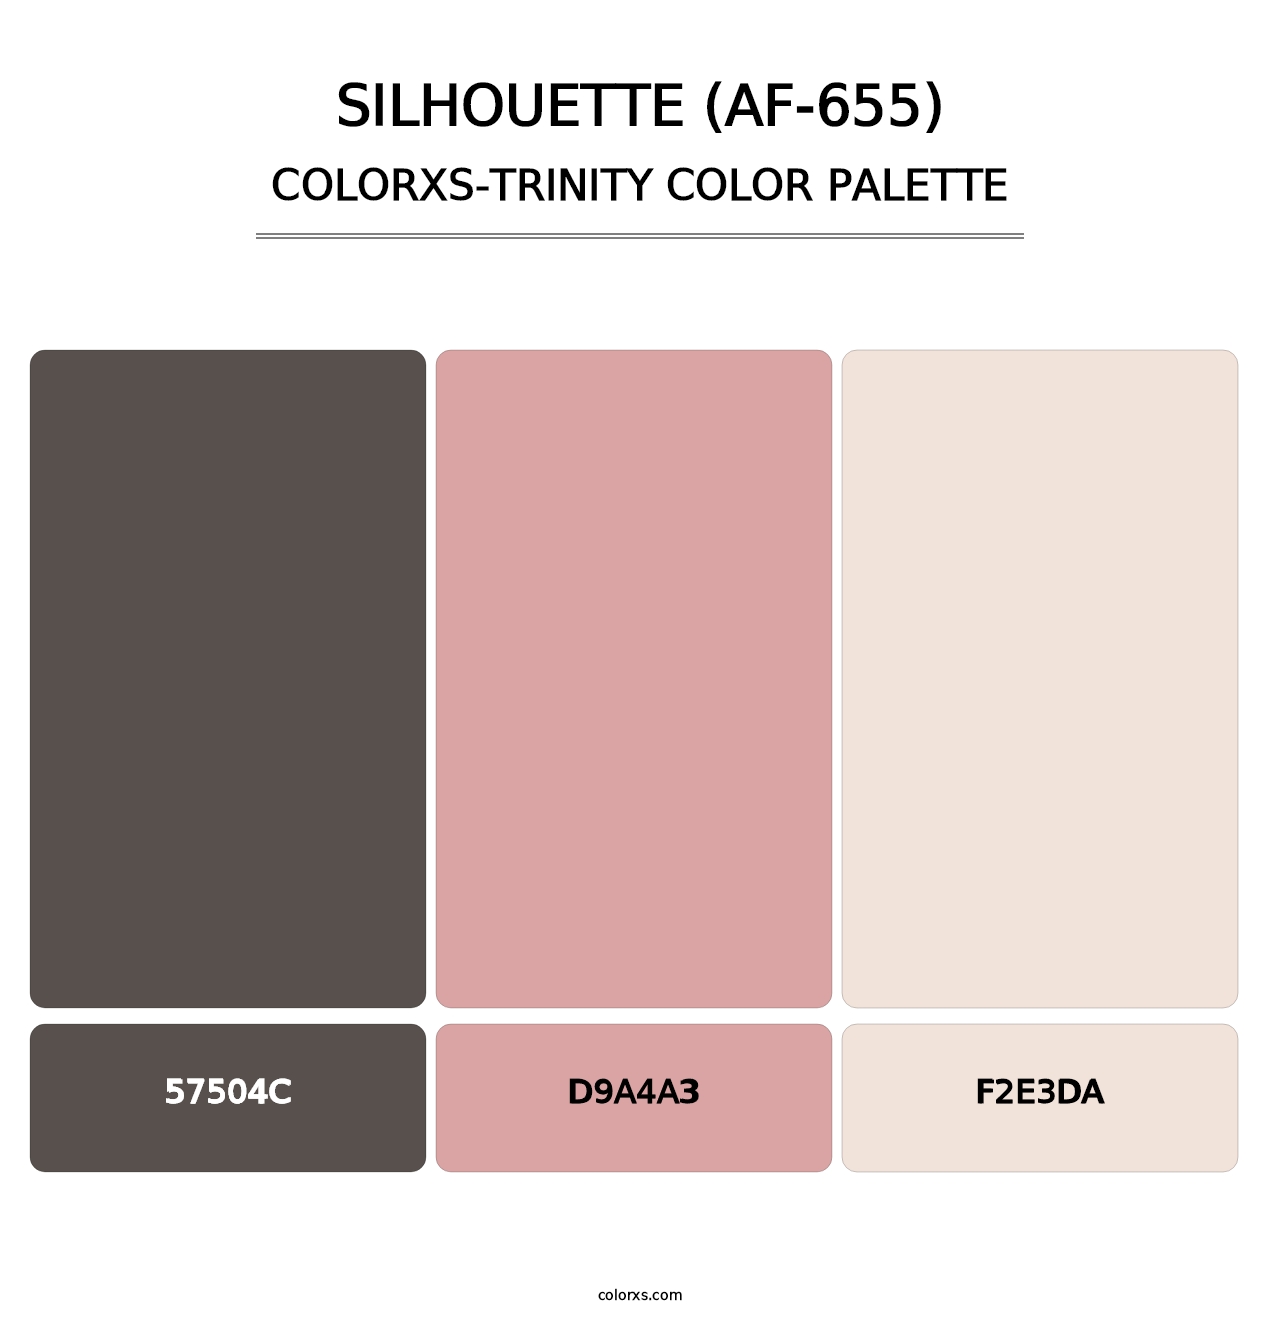 Silhouette (AF-655) - Colorxs Trinity Palette